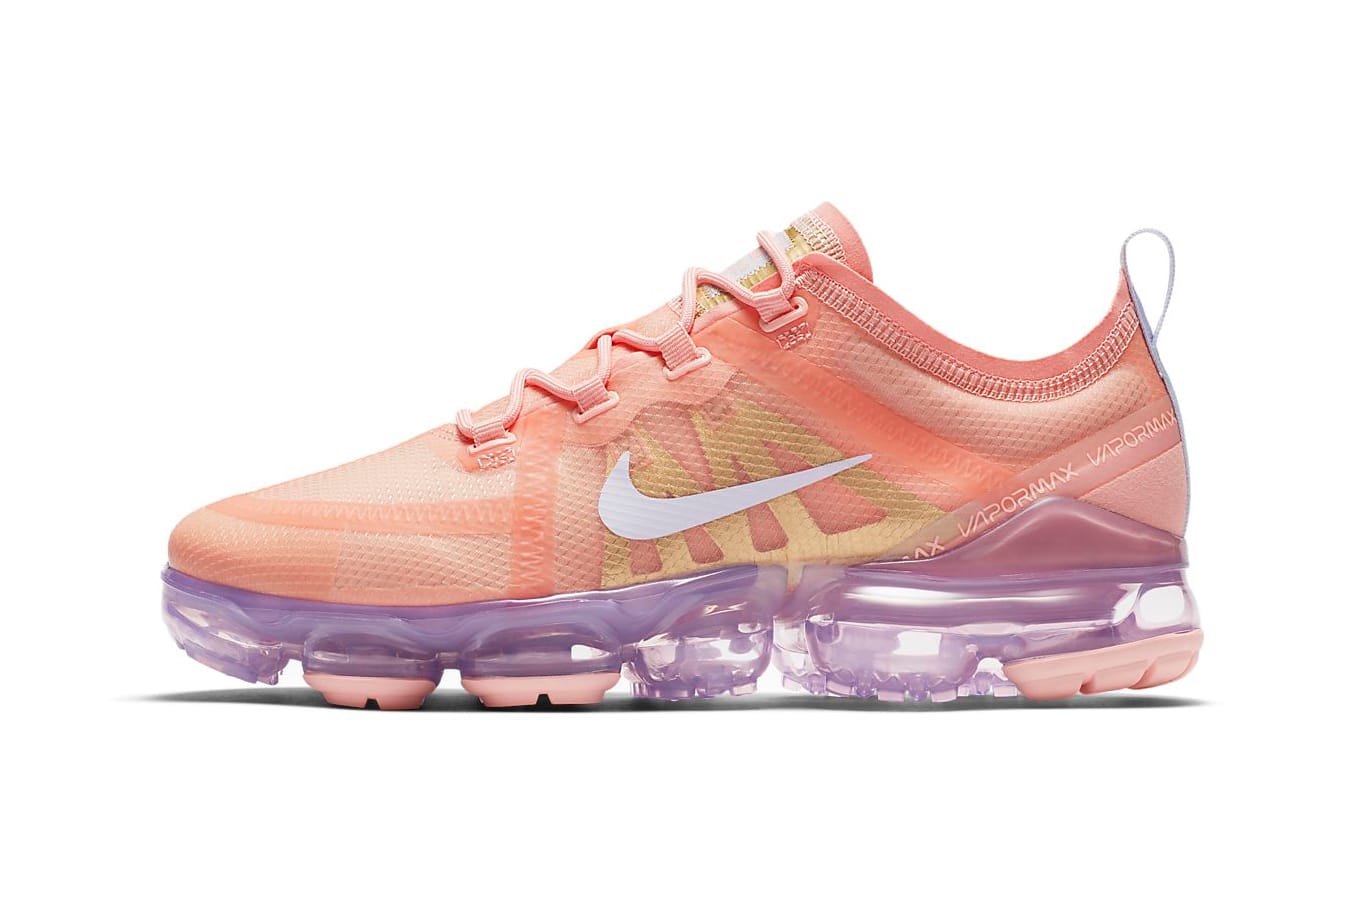 nike vapormax 19 trainers in lilac